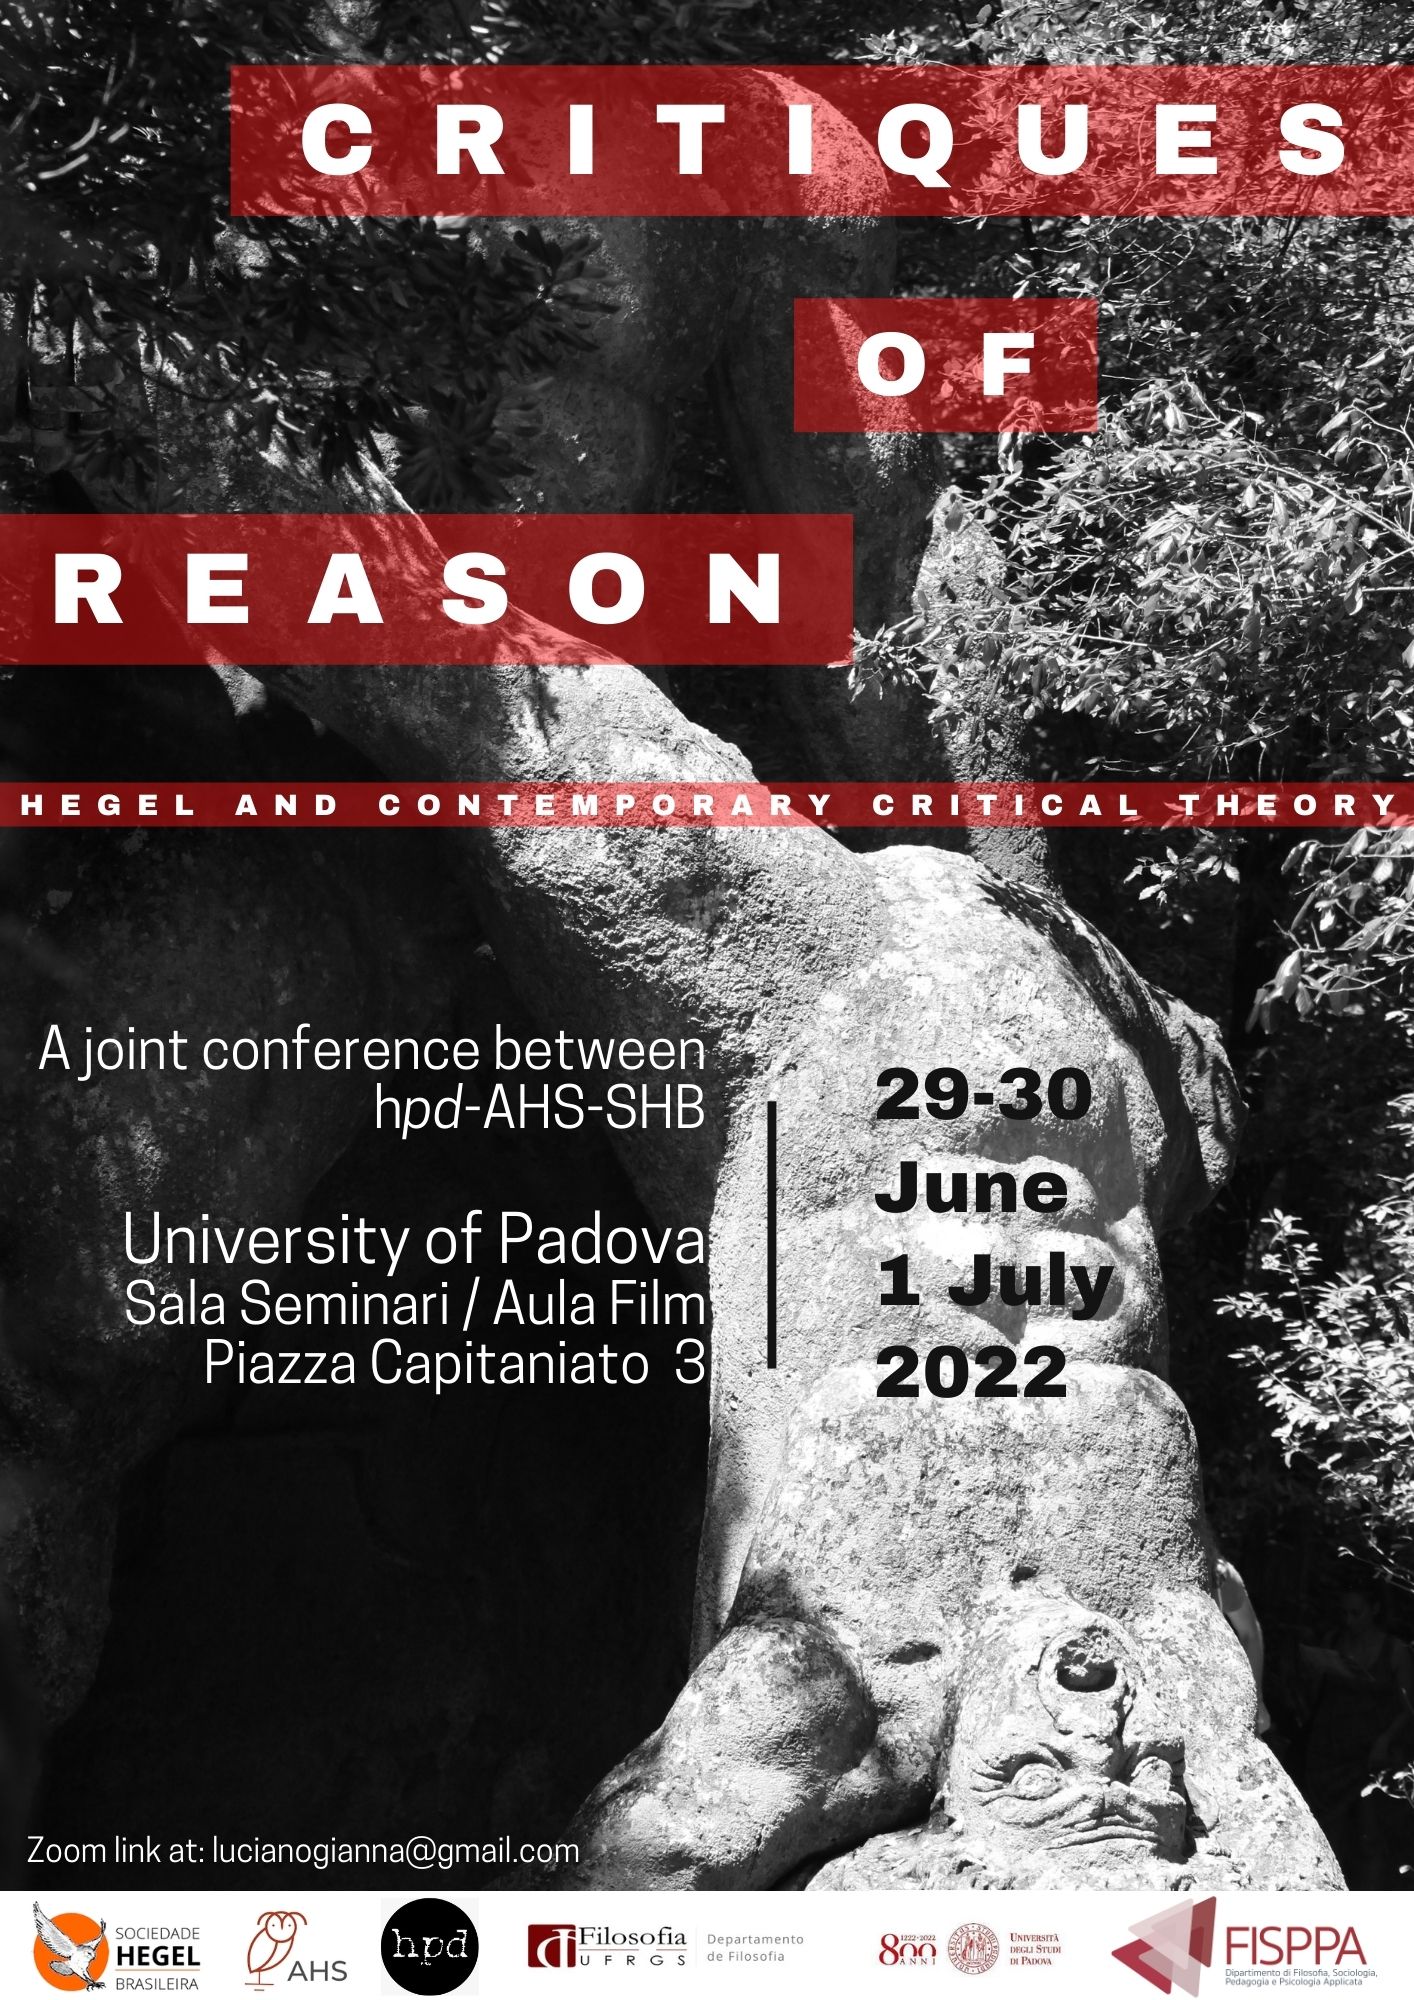 Reminder: hegelpd – Australian Hegel Society – Sociedade Hegel Brasileira Joint Conference: “Critiques of Reason: Hegel and Contemporary Critical Theory” (Padova and online, 29-30 June / 01 July 2022)